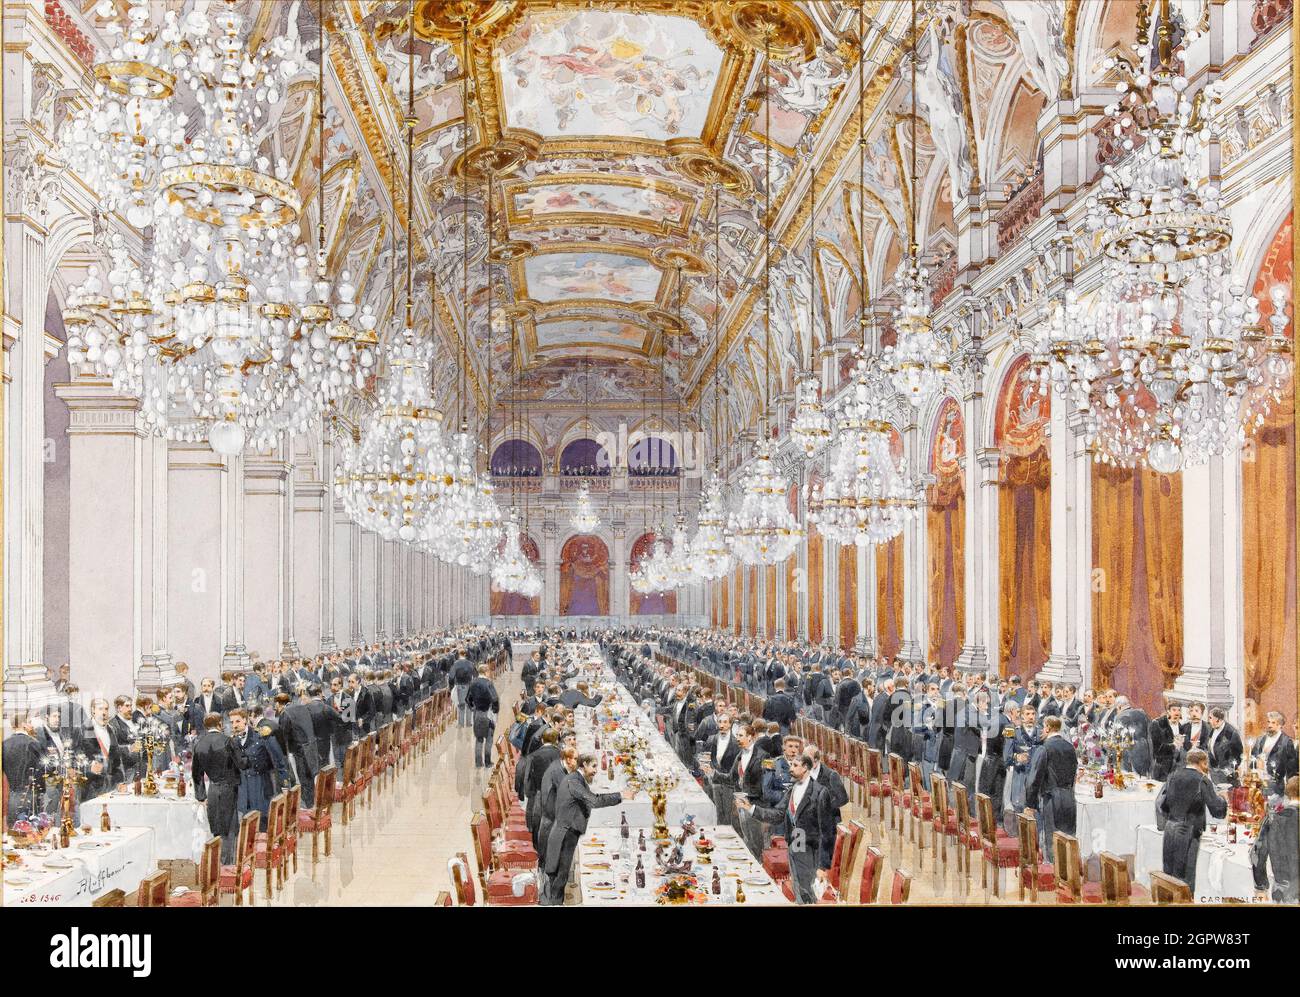 Banquet of Russian naval officers at the Town Hall. Franco-Russian celebrations in Paris, October 19, 1893, 1893. Found in the Collection of the Mus&#xe9;e Carnavalet, Paris. Stock Photo